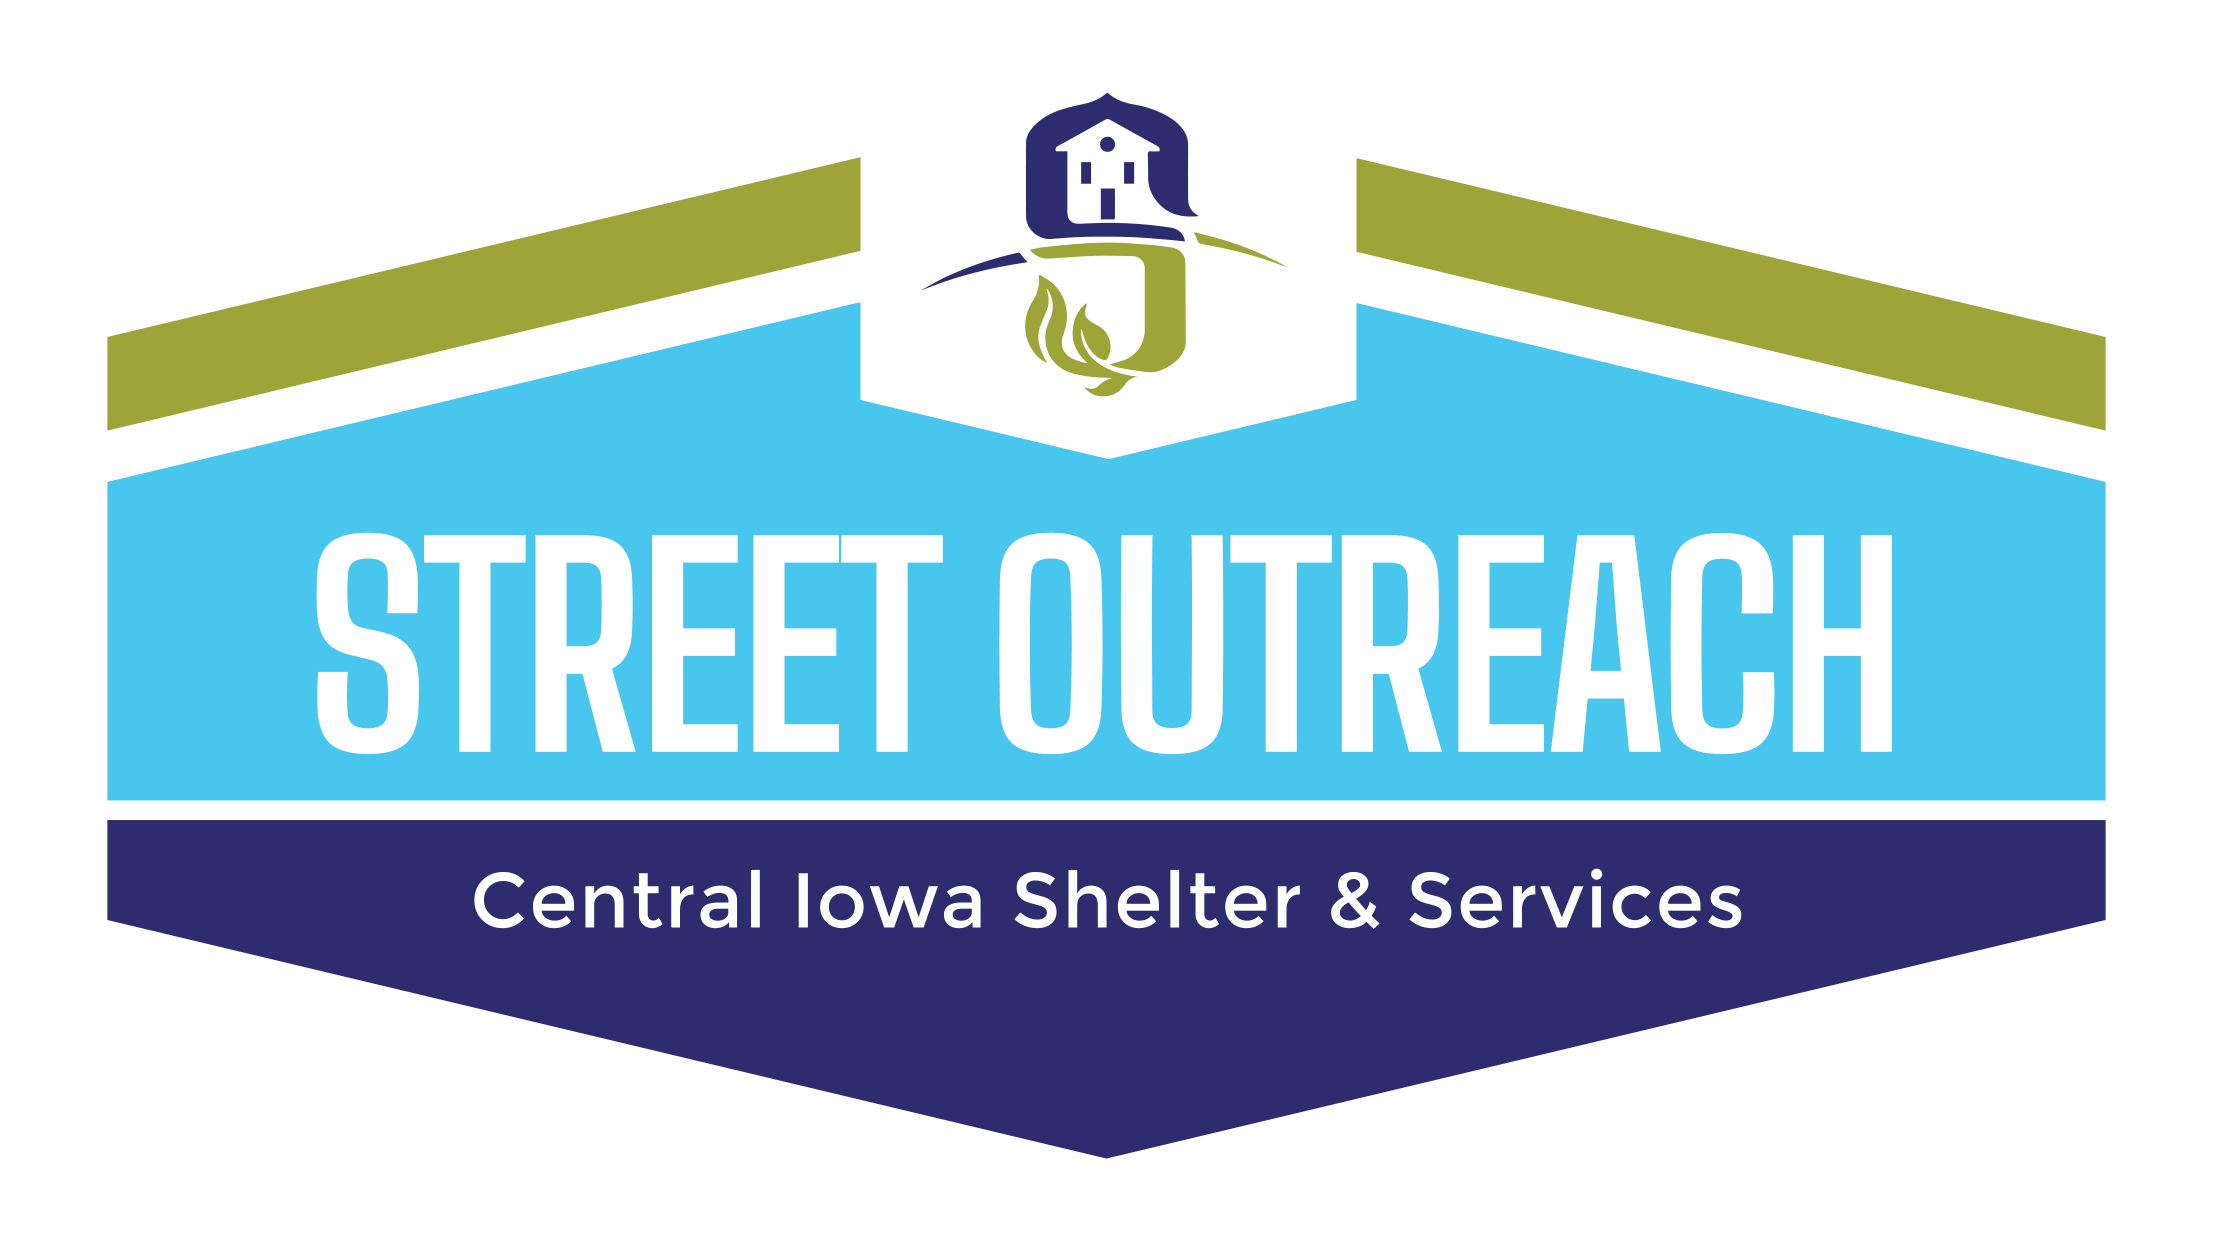 Link to Street Outreach service page